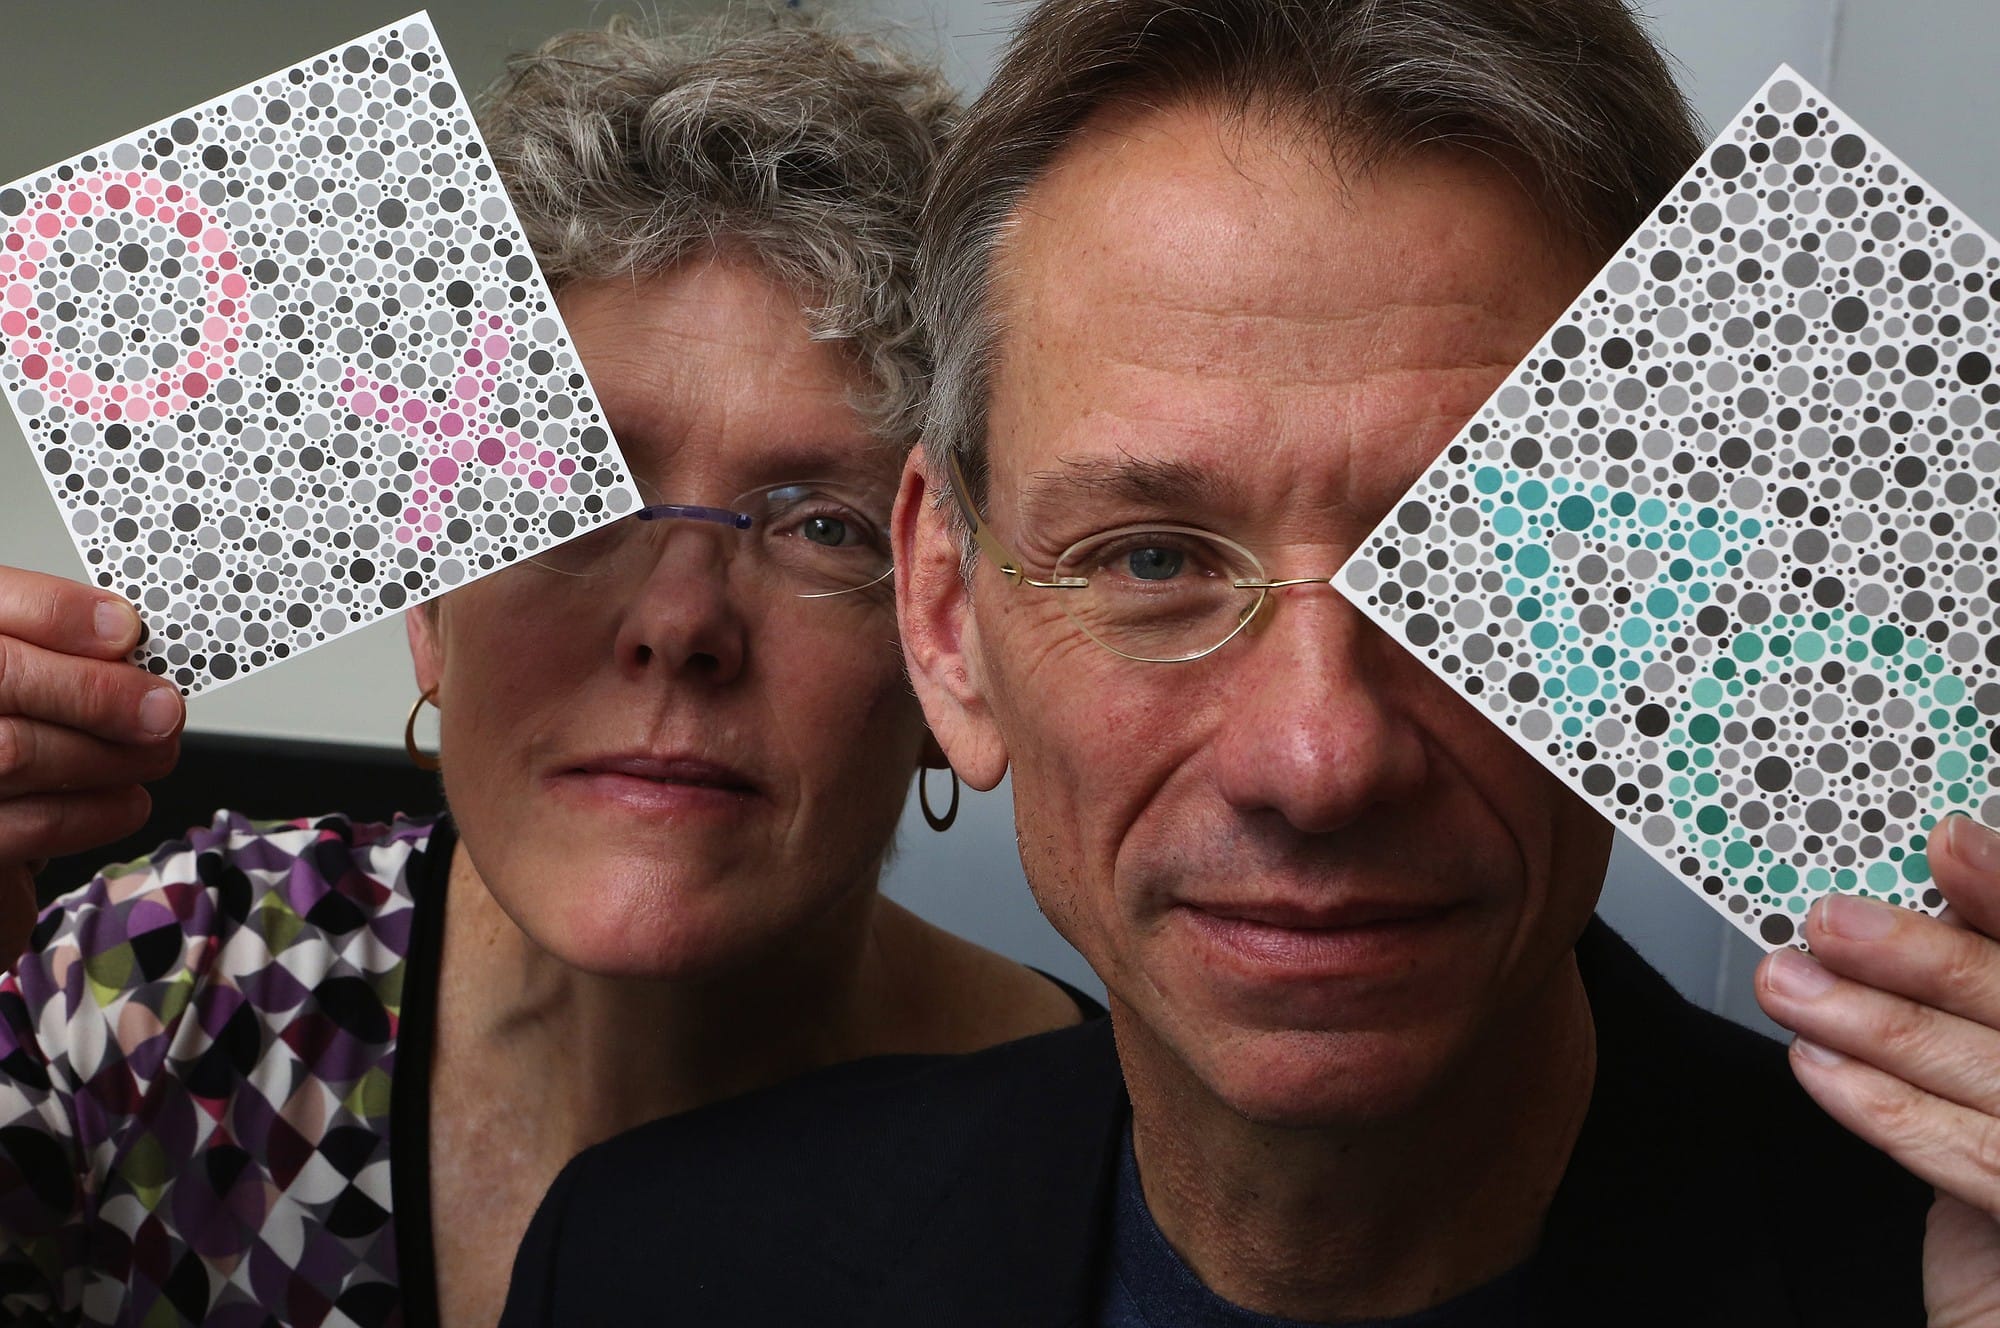 University of Washington researchers Maureen and Jay Neitz, seen holding testing cards for color perception, have teamed up with a California biotech company for a prospective gene-therapy cure for colorblindness.